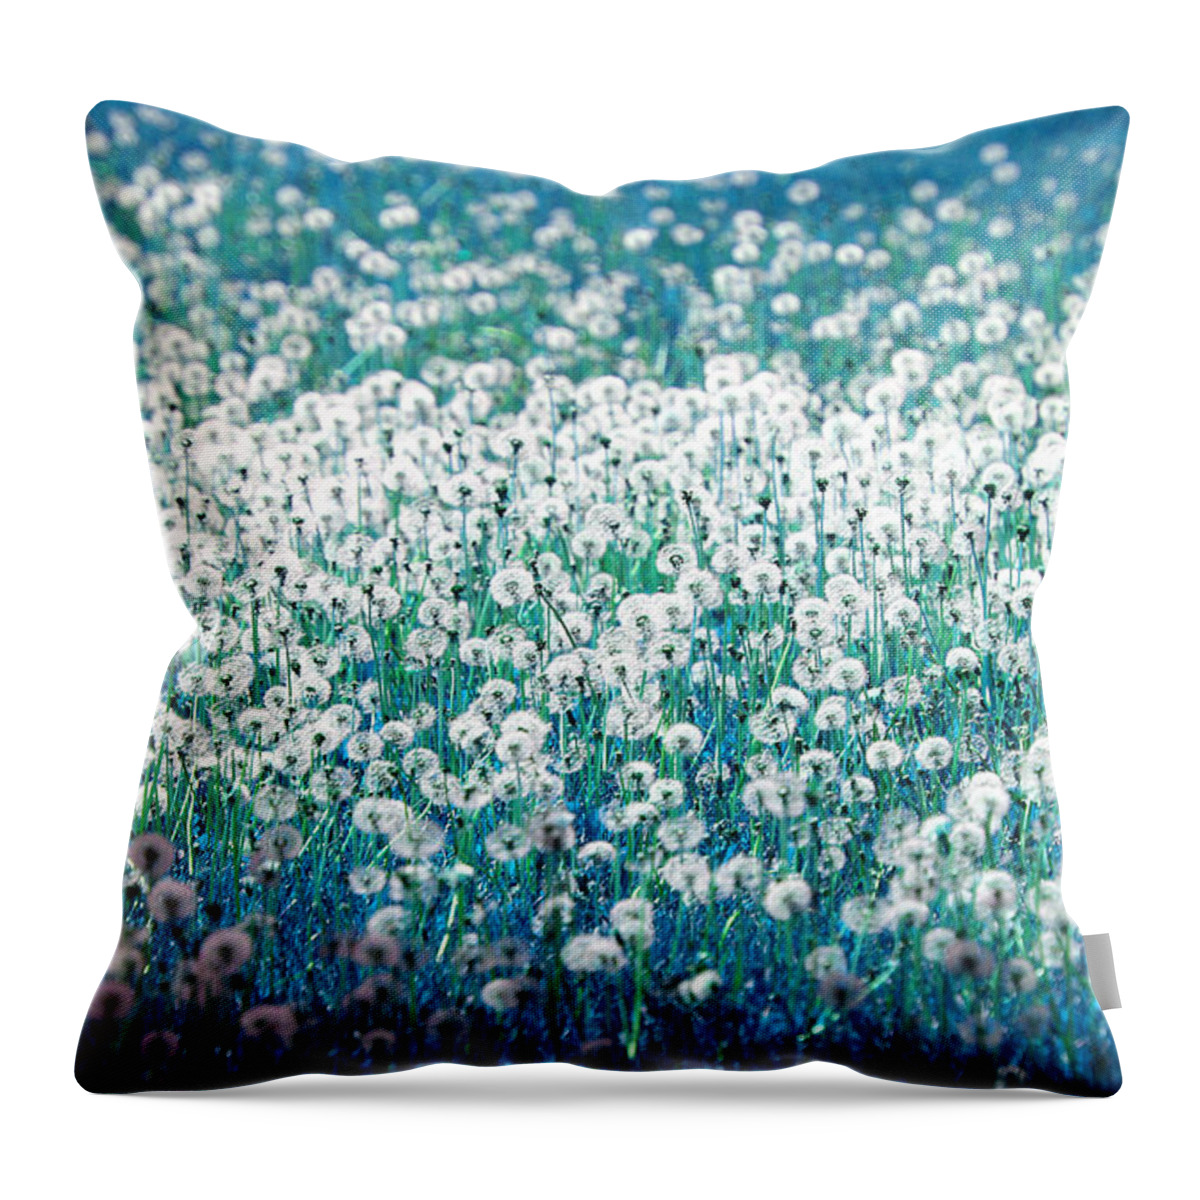 Emotional Throw Pillow featuring the photograph Tender Emotions by The Art Of Marilyn Ridoutt-Greene